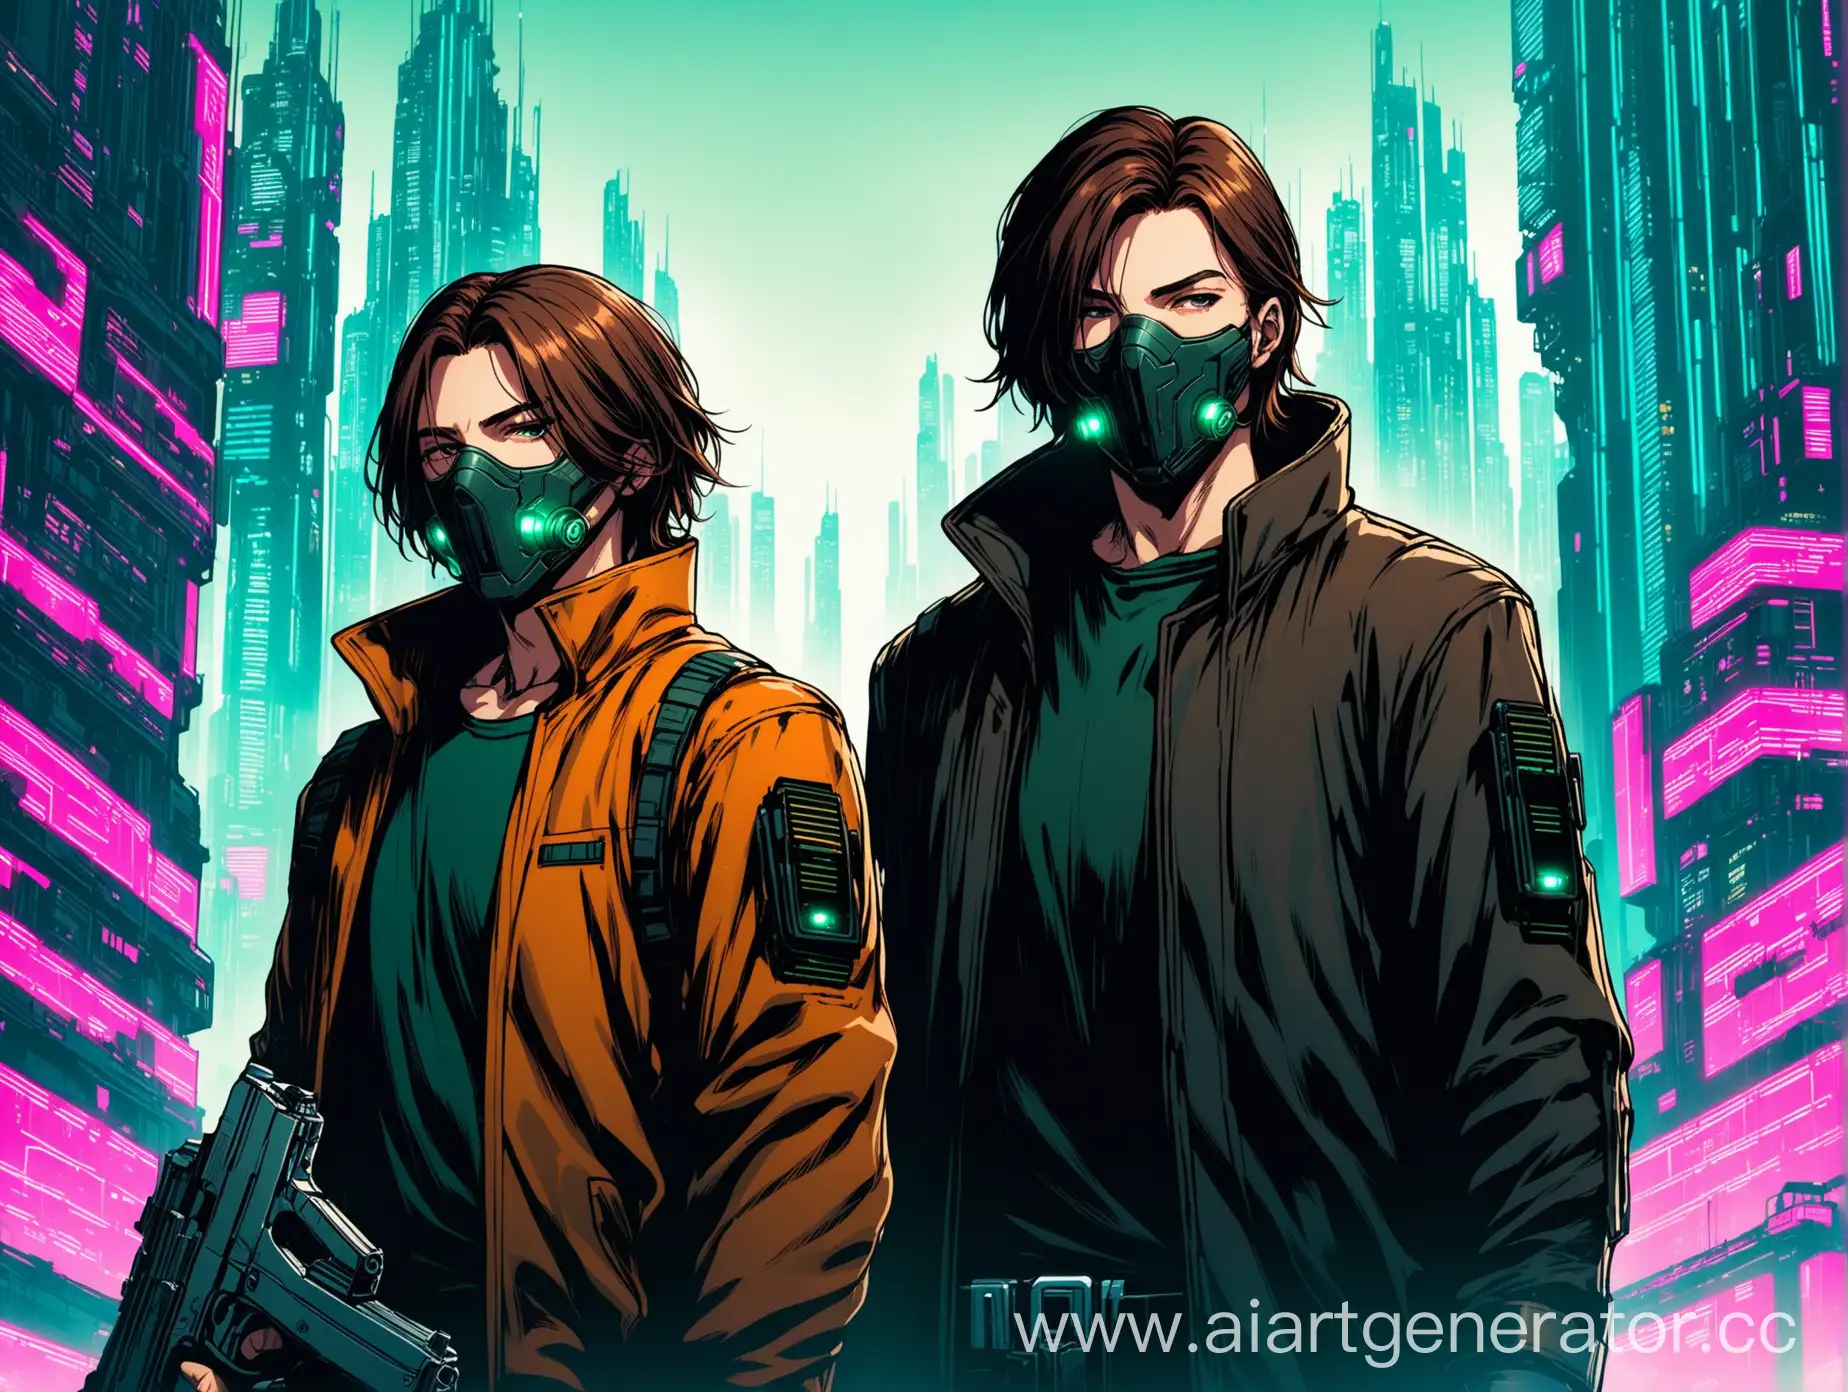 Two-Men-Dueling-with-Pistols-in-Futuristic-Cyberpunk-Cityscape